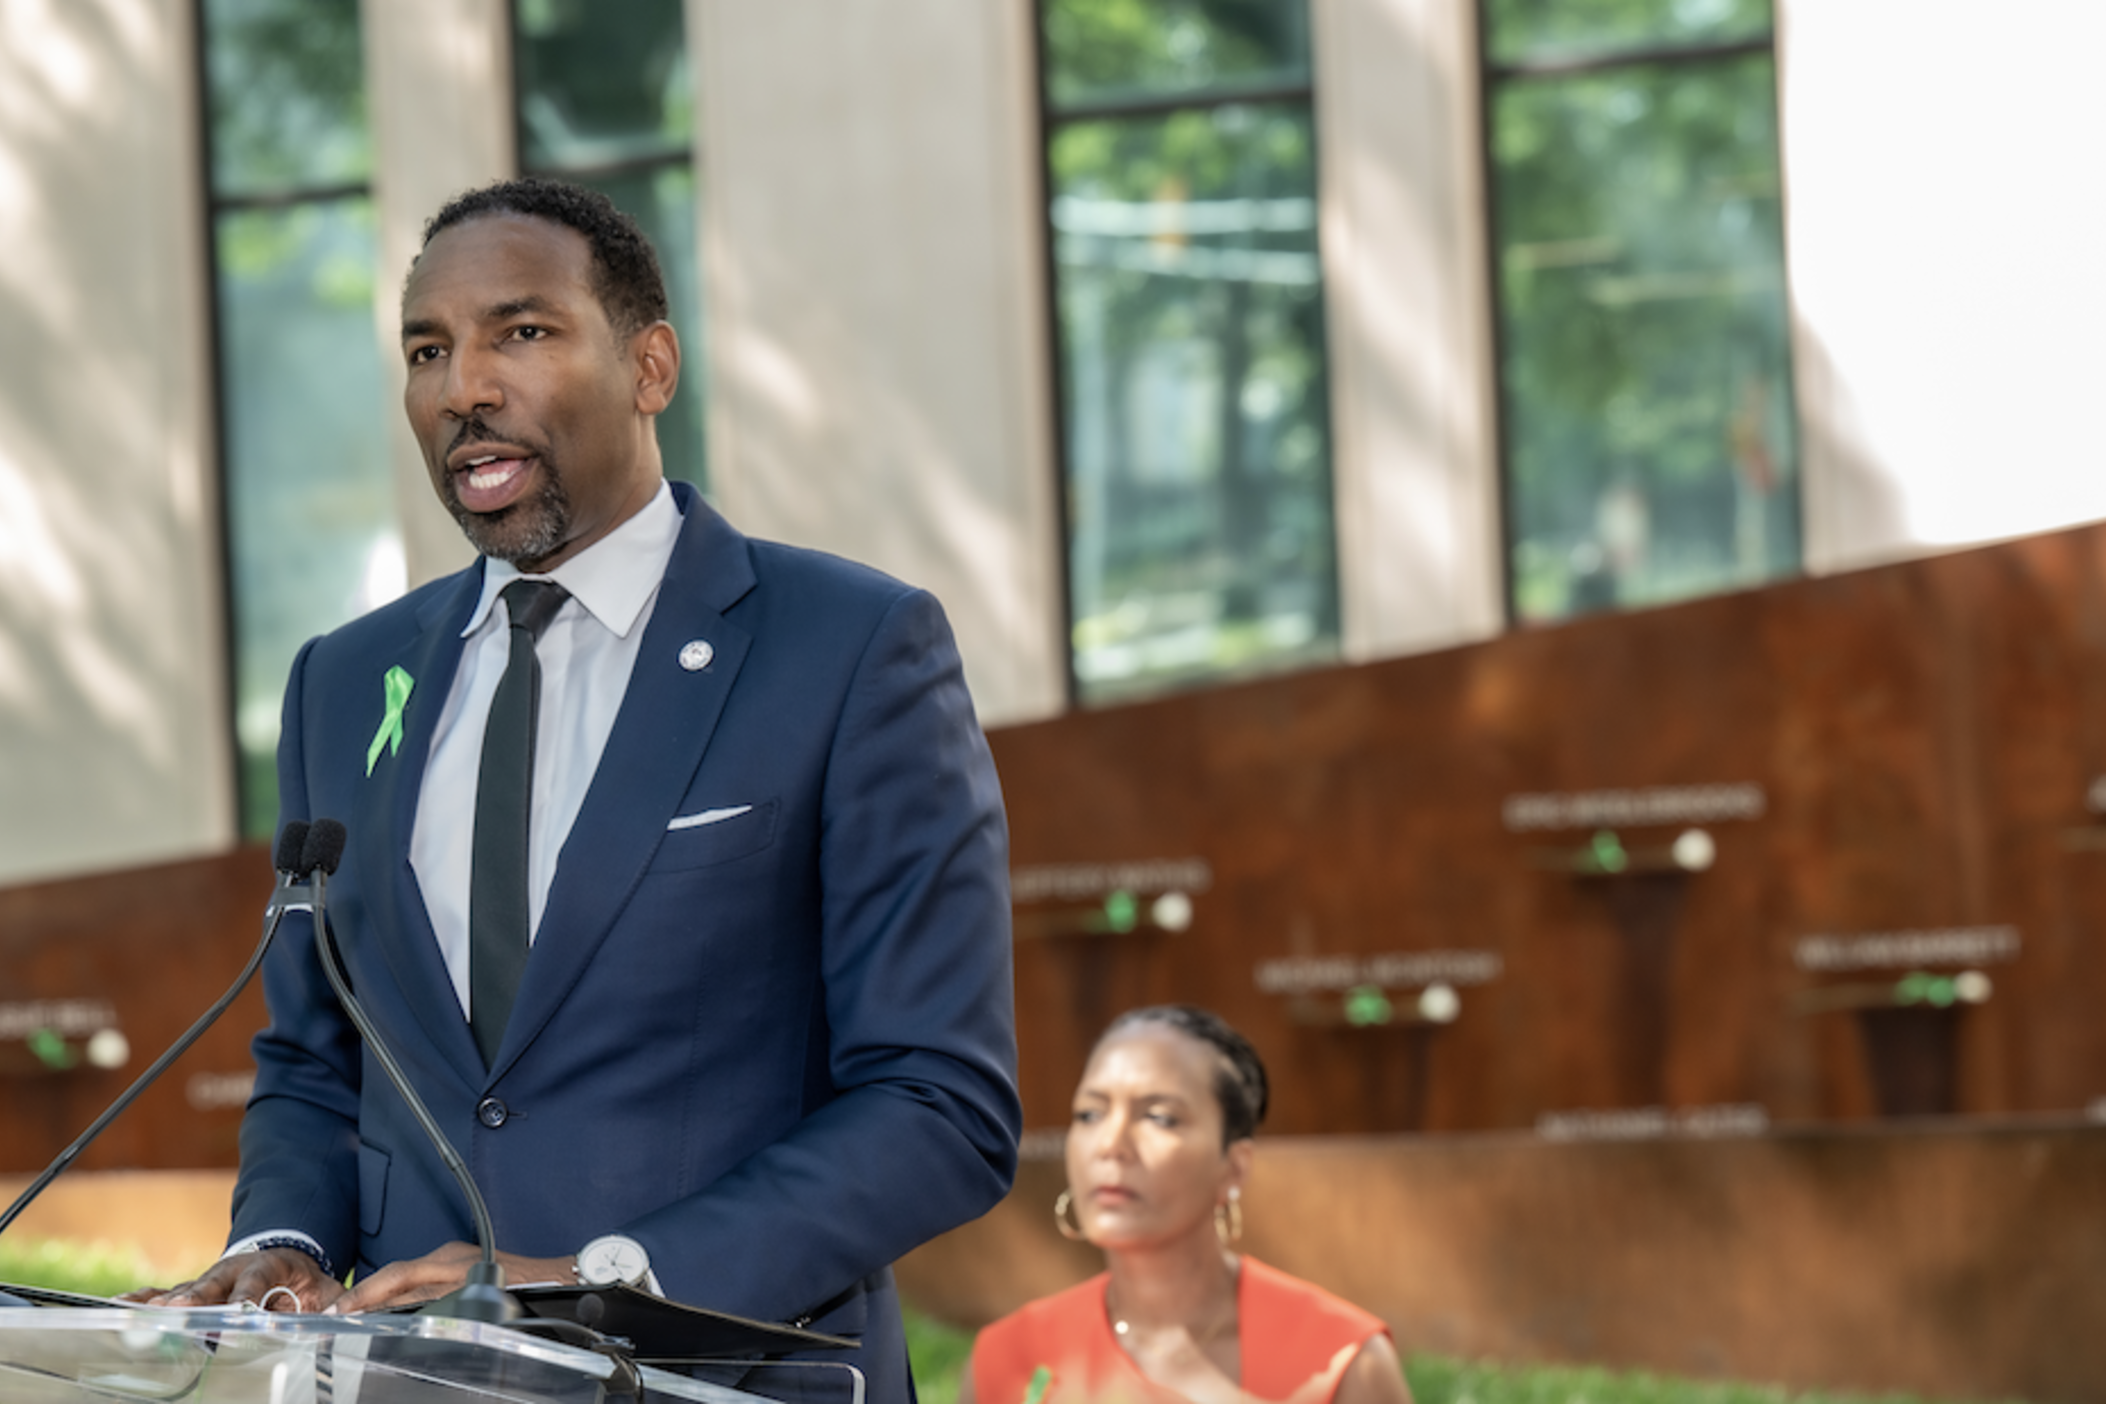 On the grounds of City Hall, Atlanta Mayor Andre Dickens speaks at the June 27, 2023 dedication of an eternity flame and memory wall in honor of victims of the Atlanta Child Murders as former mayor Keisha Lance Bottoms looks on.